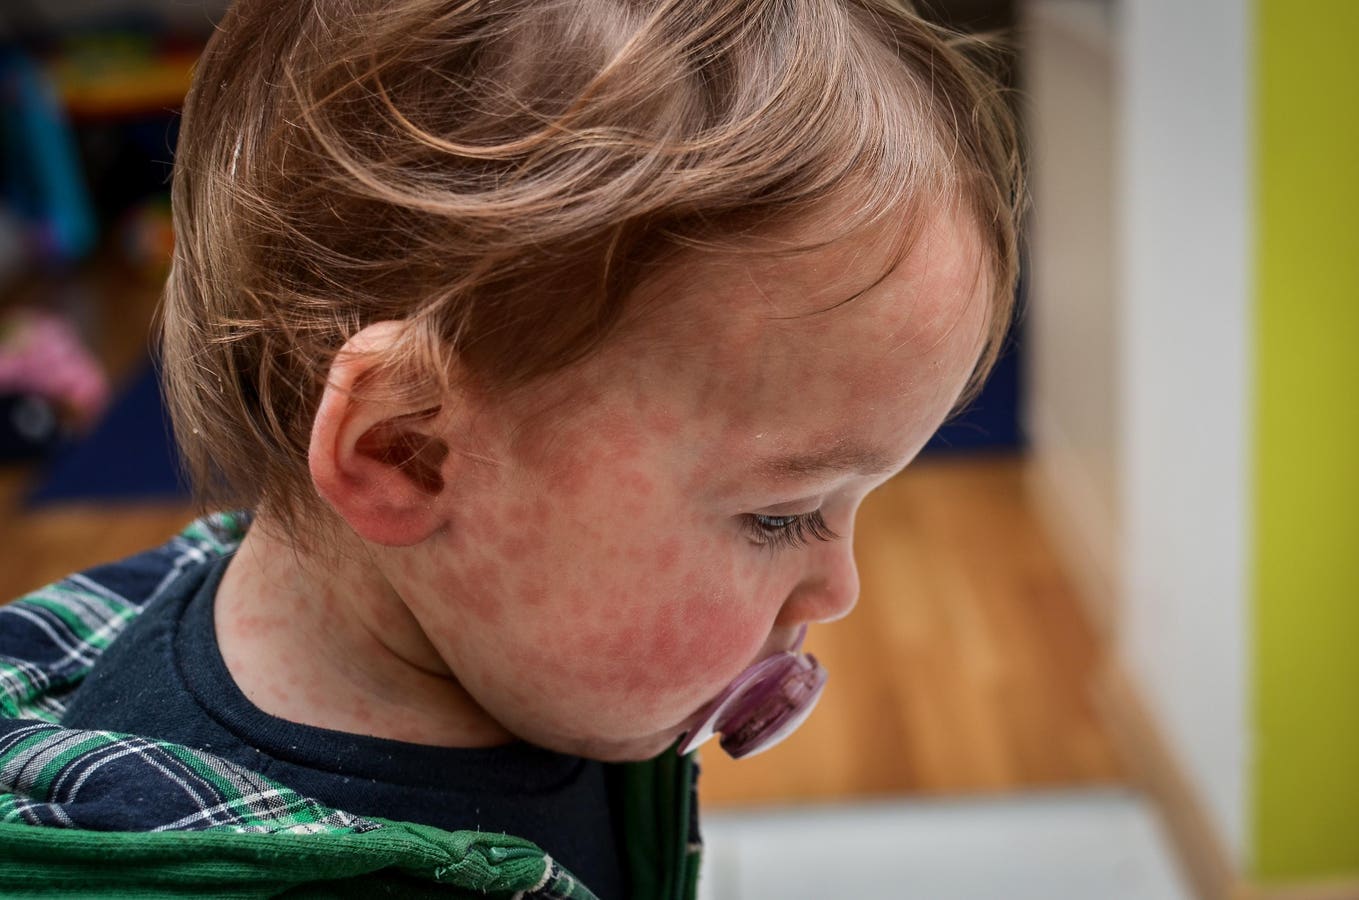 London Measles Outbreak Reported As U.K. Sees Continued Rise in Cases